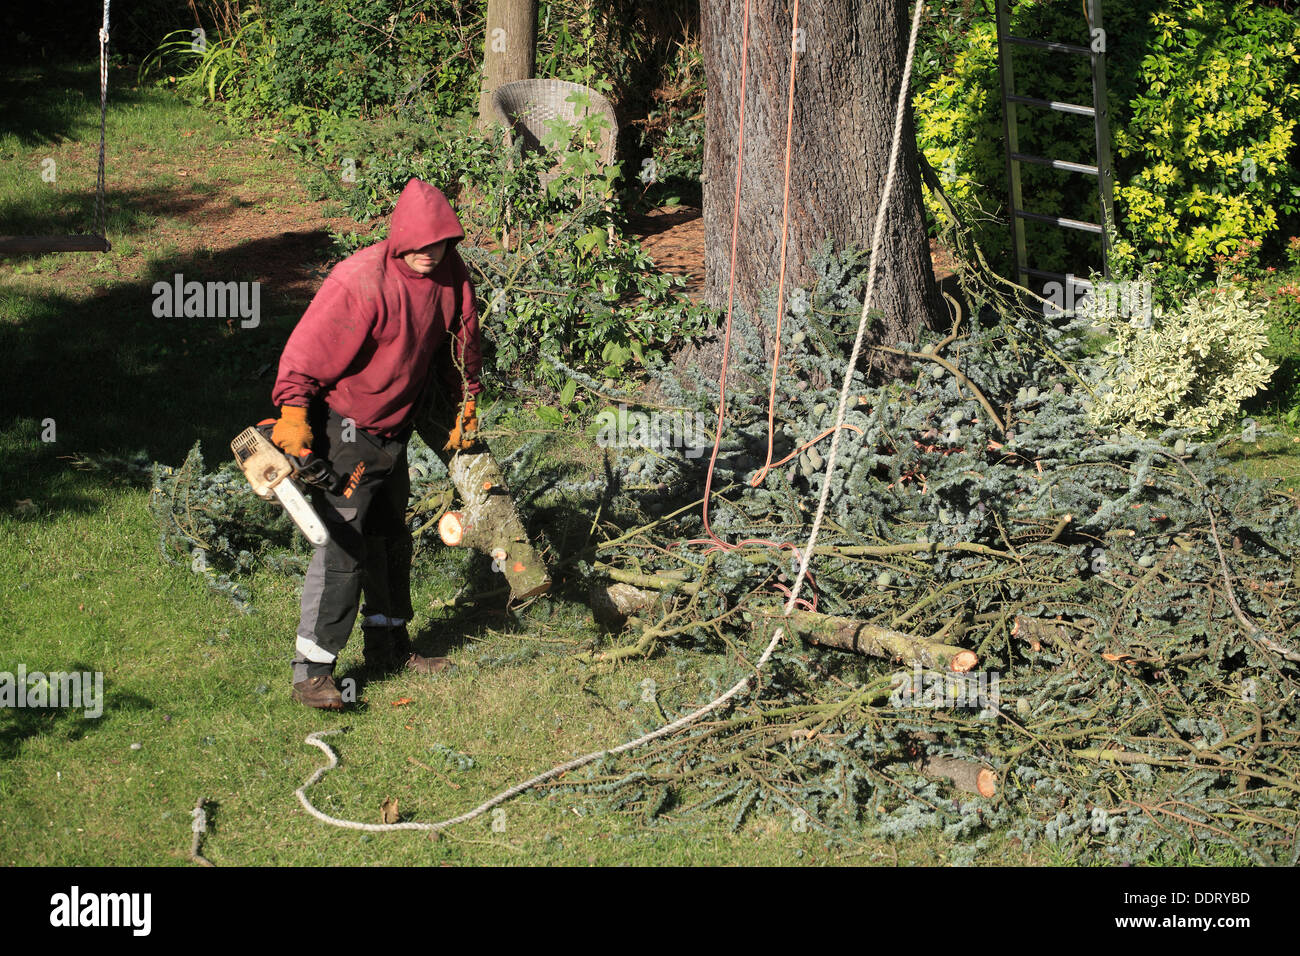 Trimming Cedar Tree with broken branches Stock Photo